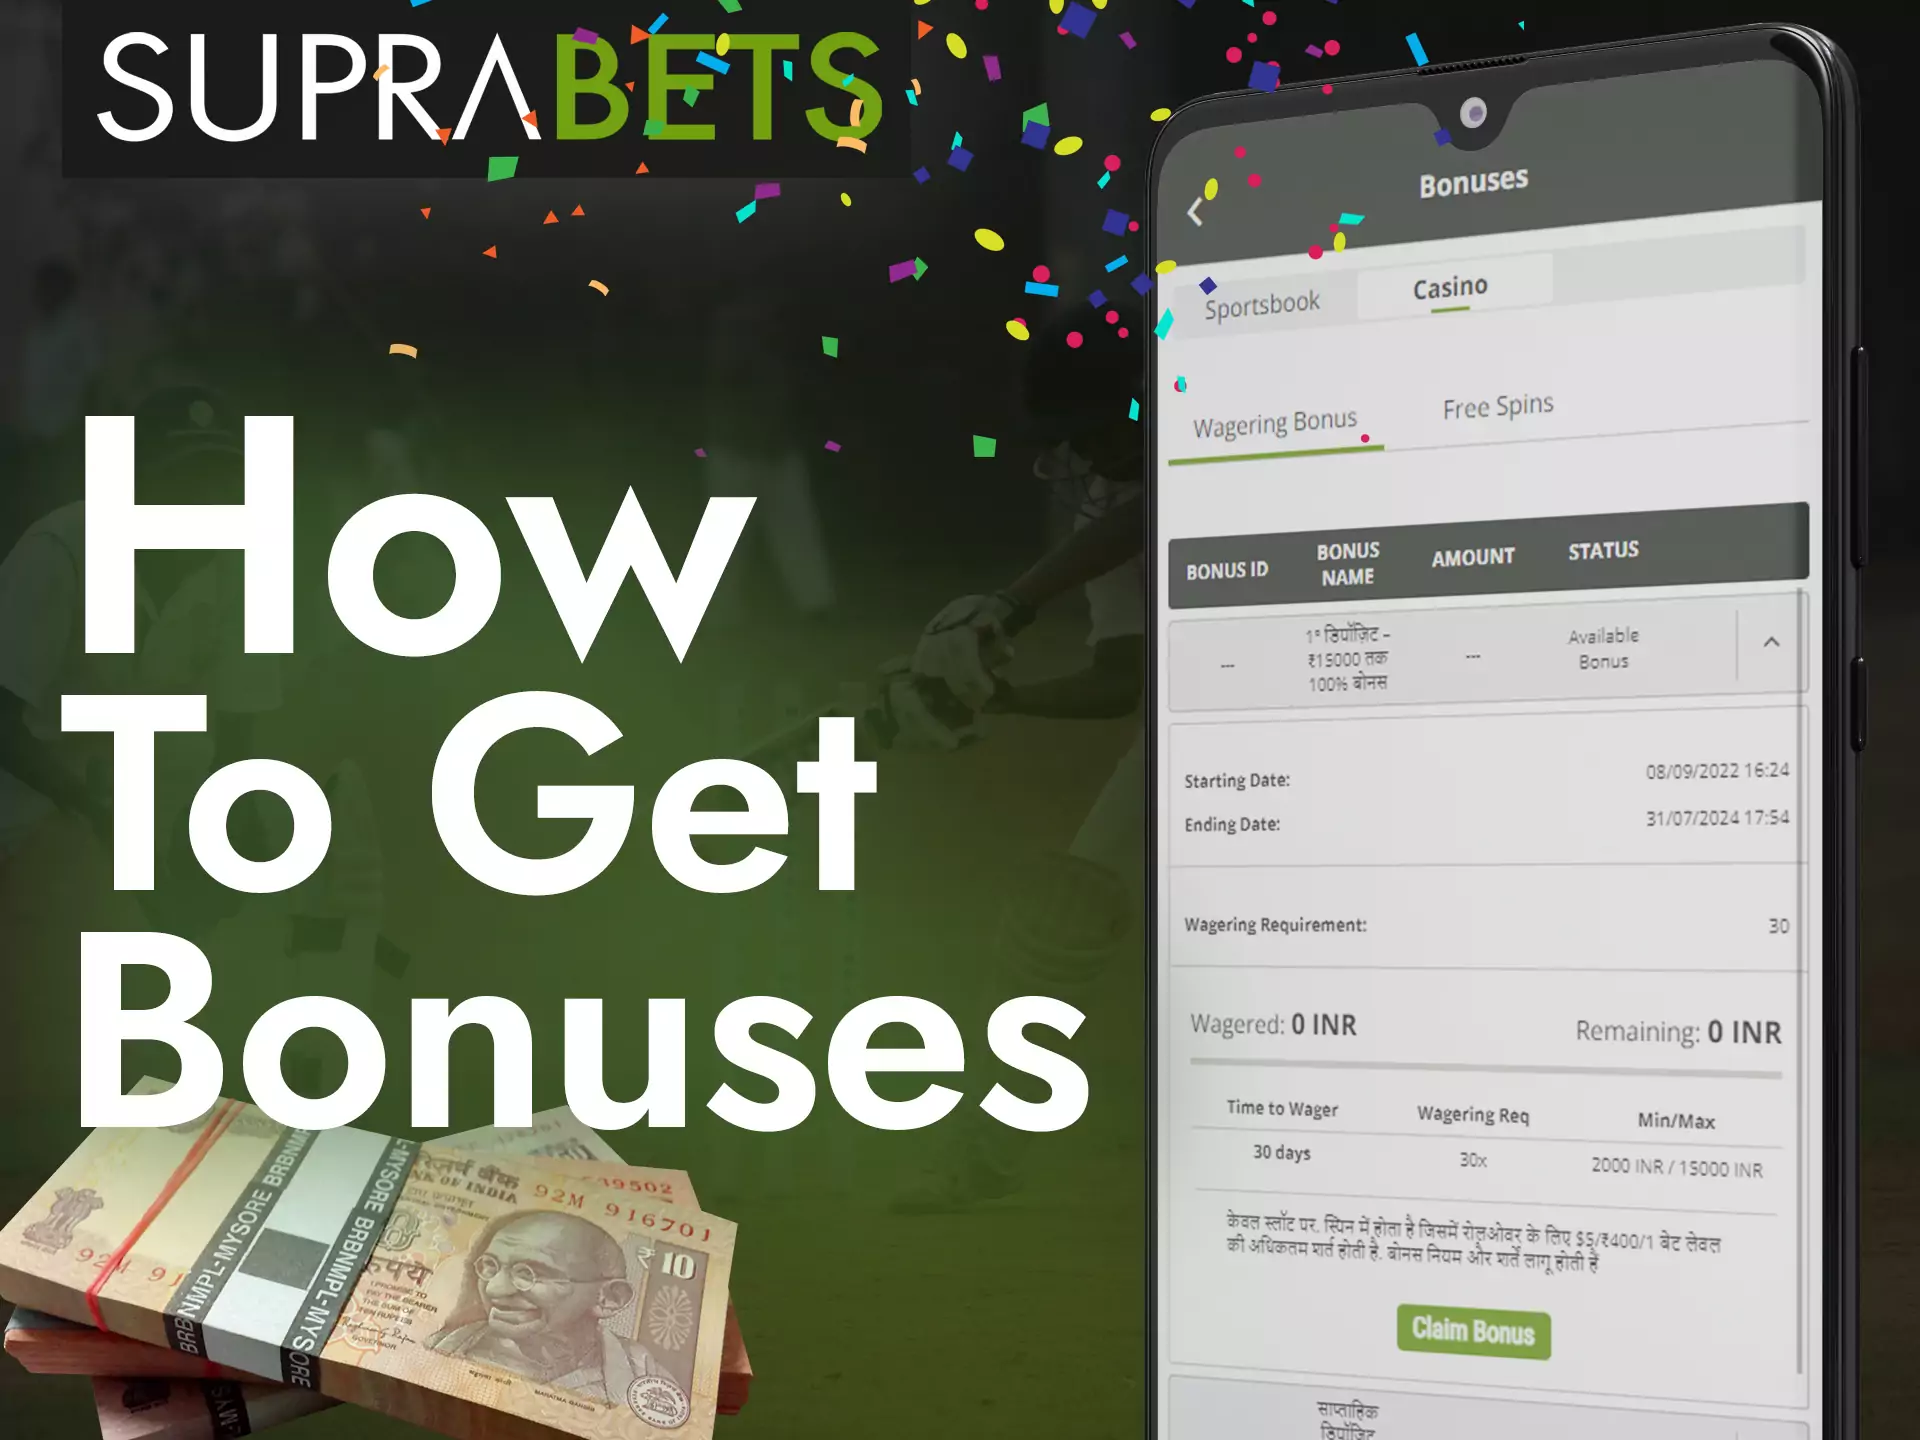 With this instruction, learn how to get all the Suprabets bonuses.